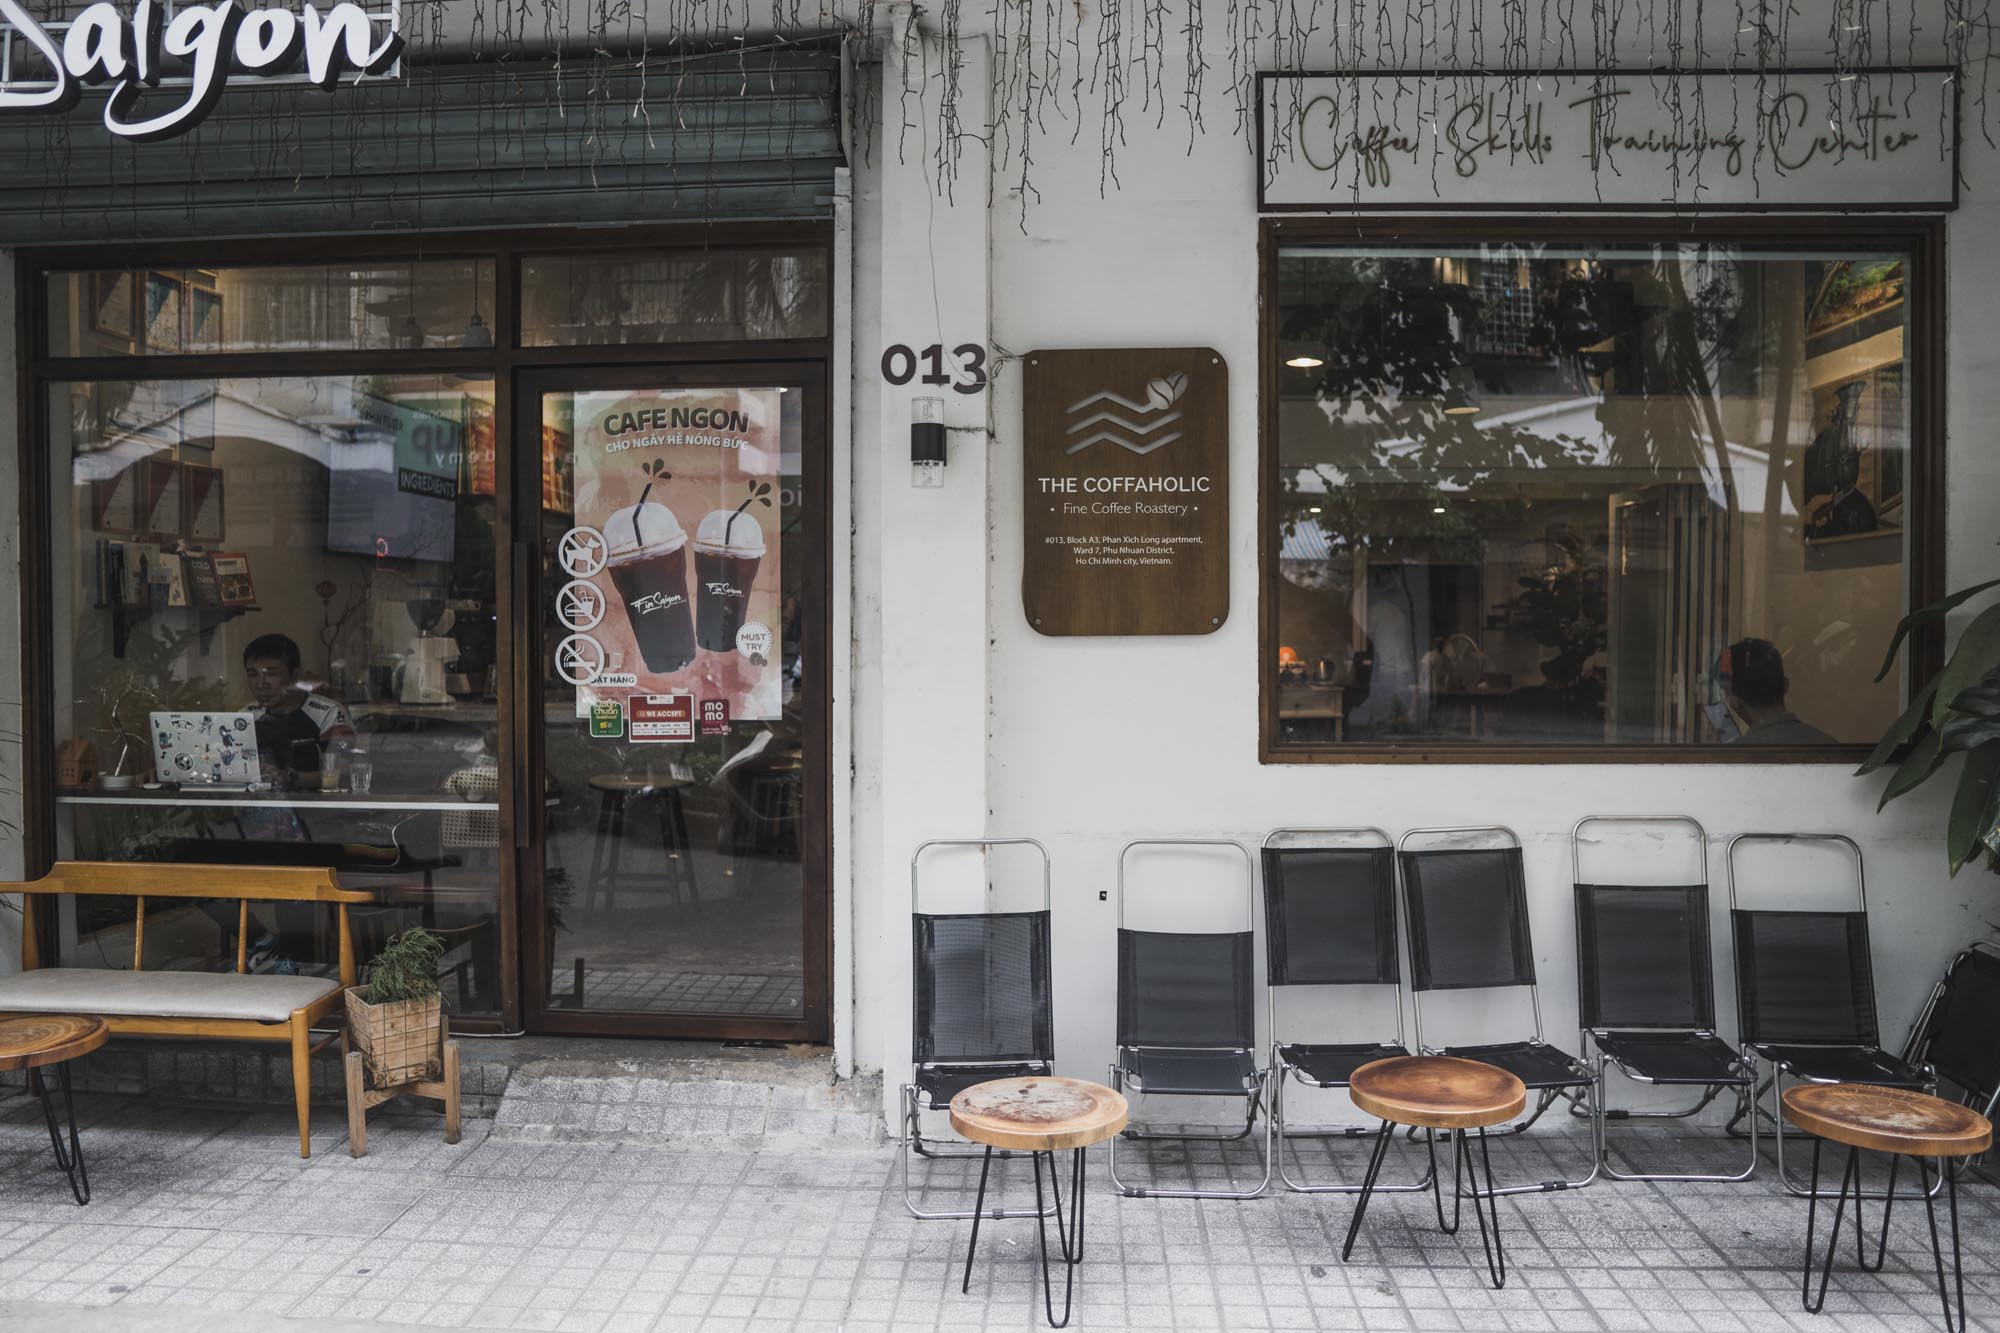 Coffeeholics rejoice! Have your afternoon brew at Fin Saigon in Phan Xich Long, a vibrant district popular with young locals, due to its numerous secret cafes and juice bars. Photo by Nam Quoc Tran